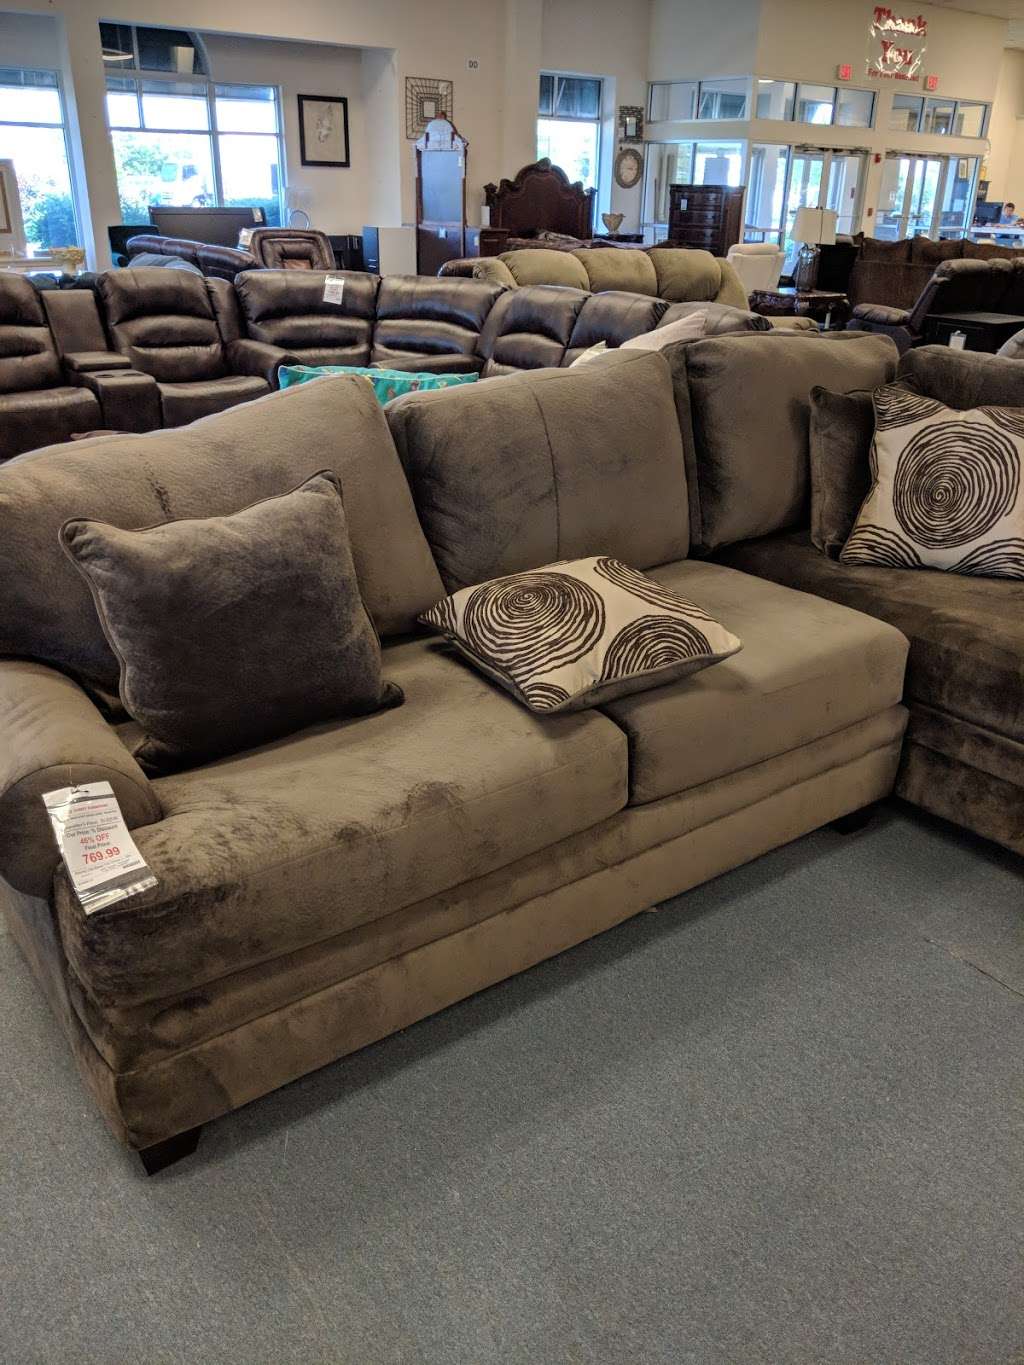 Cheny Furniture - New, Resale, Consignment | 801 E Park Ave, Libertyville, IL 60048 | Phone: (847) 996-0800